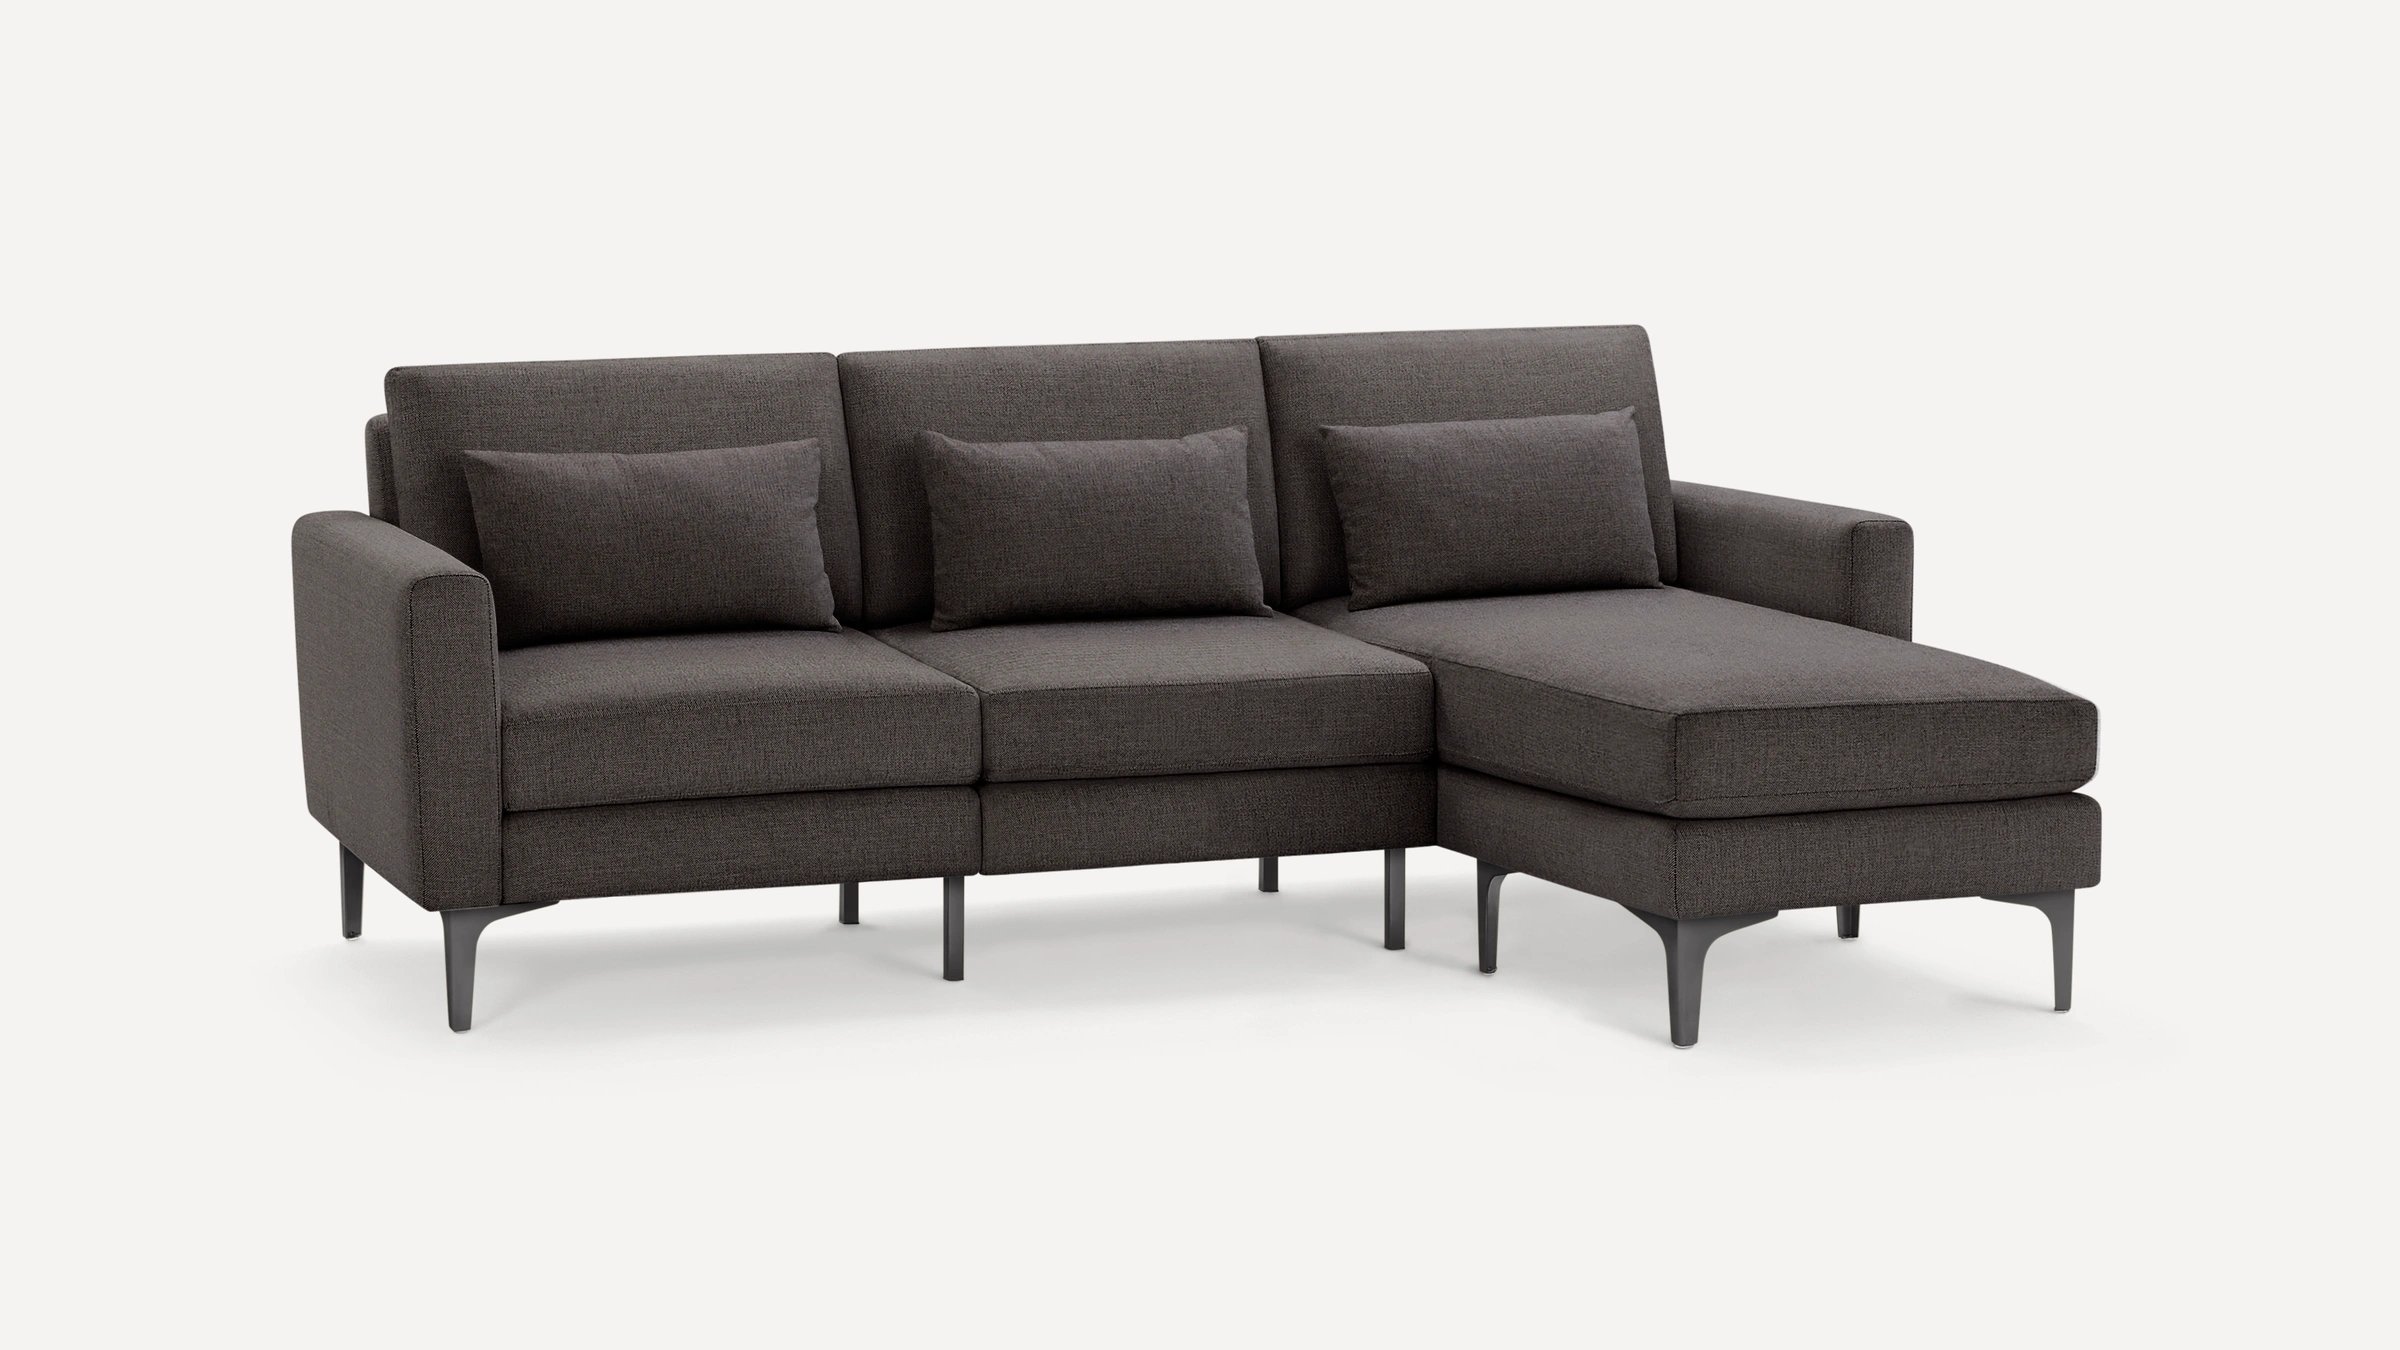 Nomad Sofa Sectional in Charcoal, Black Metal Legs - Image 0